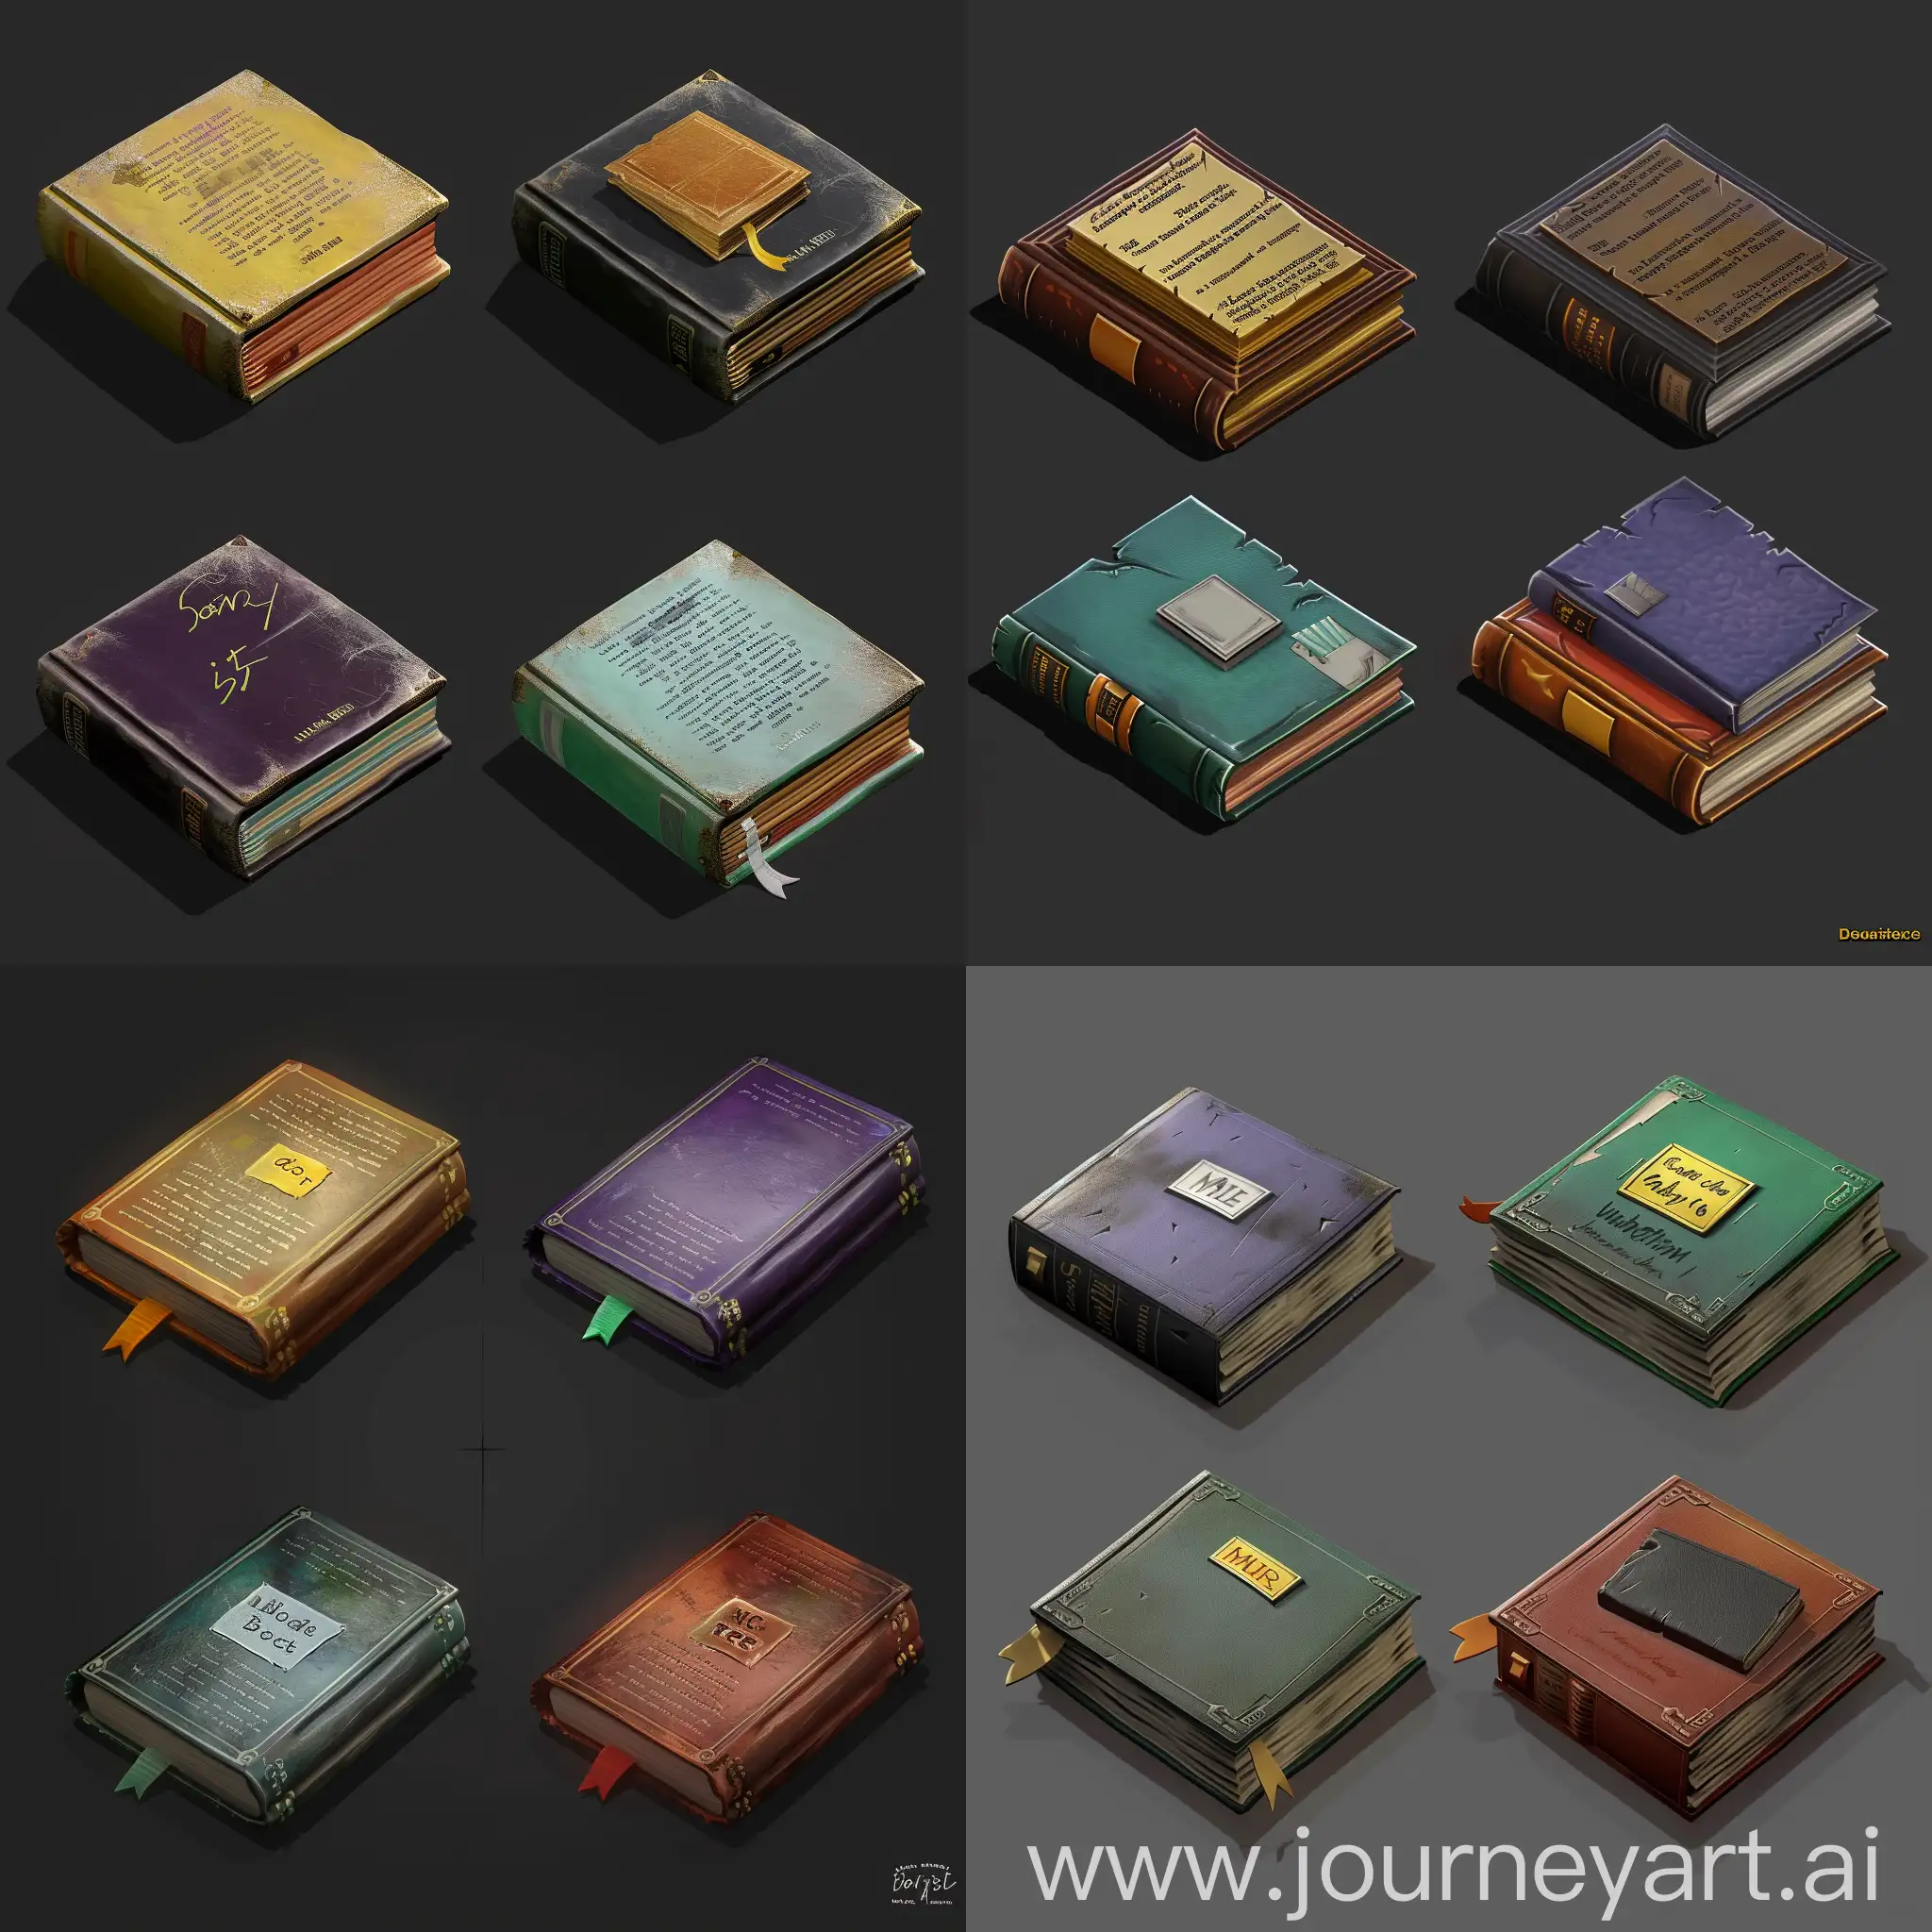 https://imgbly.com/ib/NhVu9noHmK.jpg realistic wornclean very thin books without text in style of realistic 3d blender game asset, leather cover, realisic style, highly detailed texture, sprite sheet isometric set